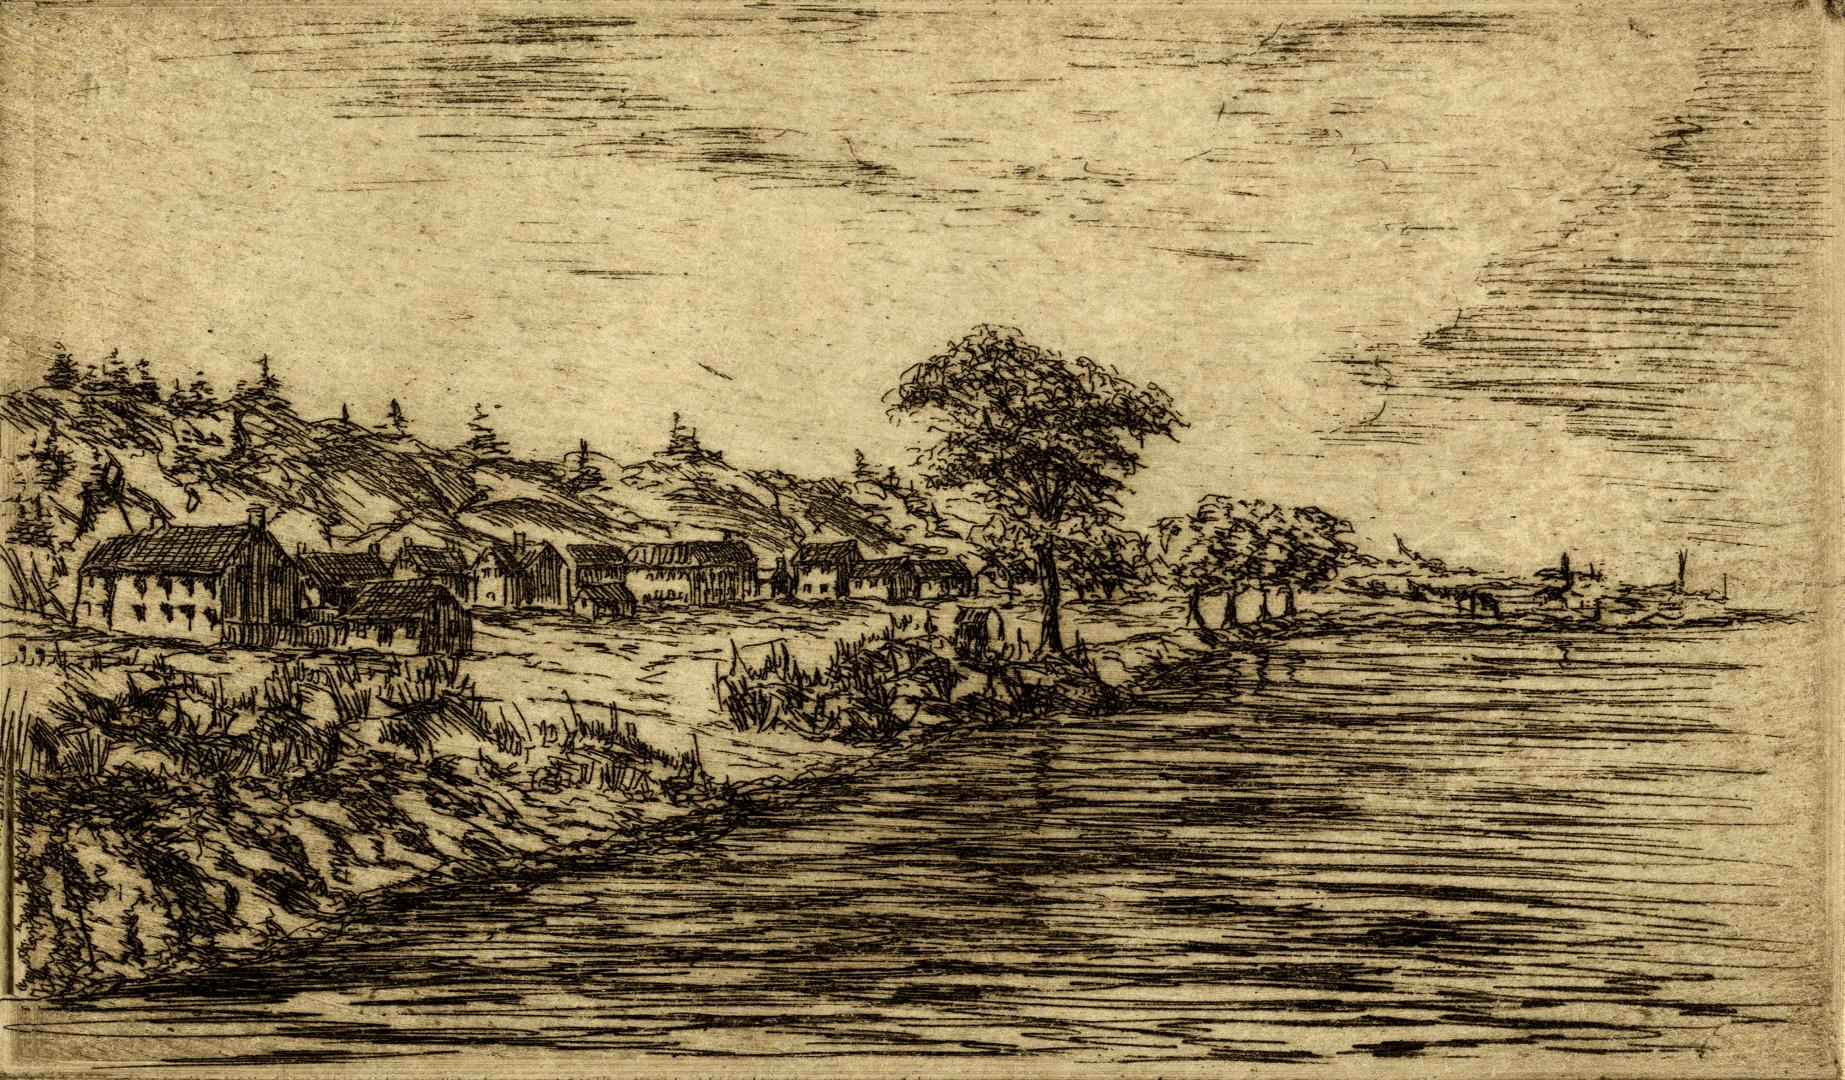 Image shows some houses and trees by the water.